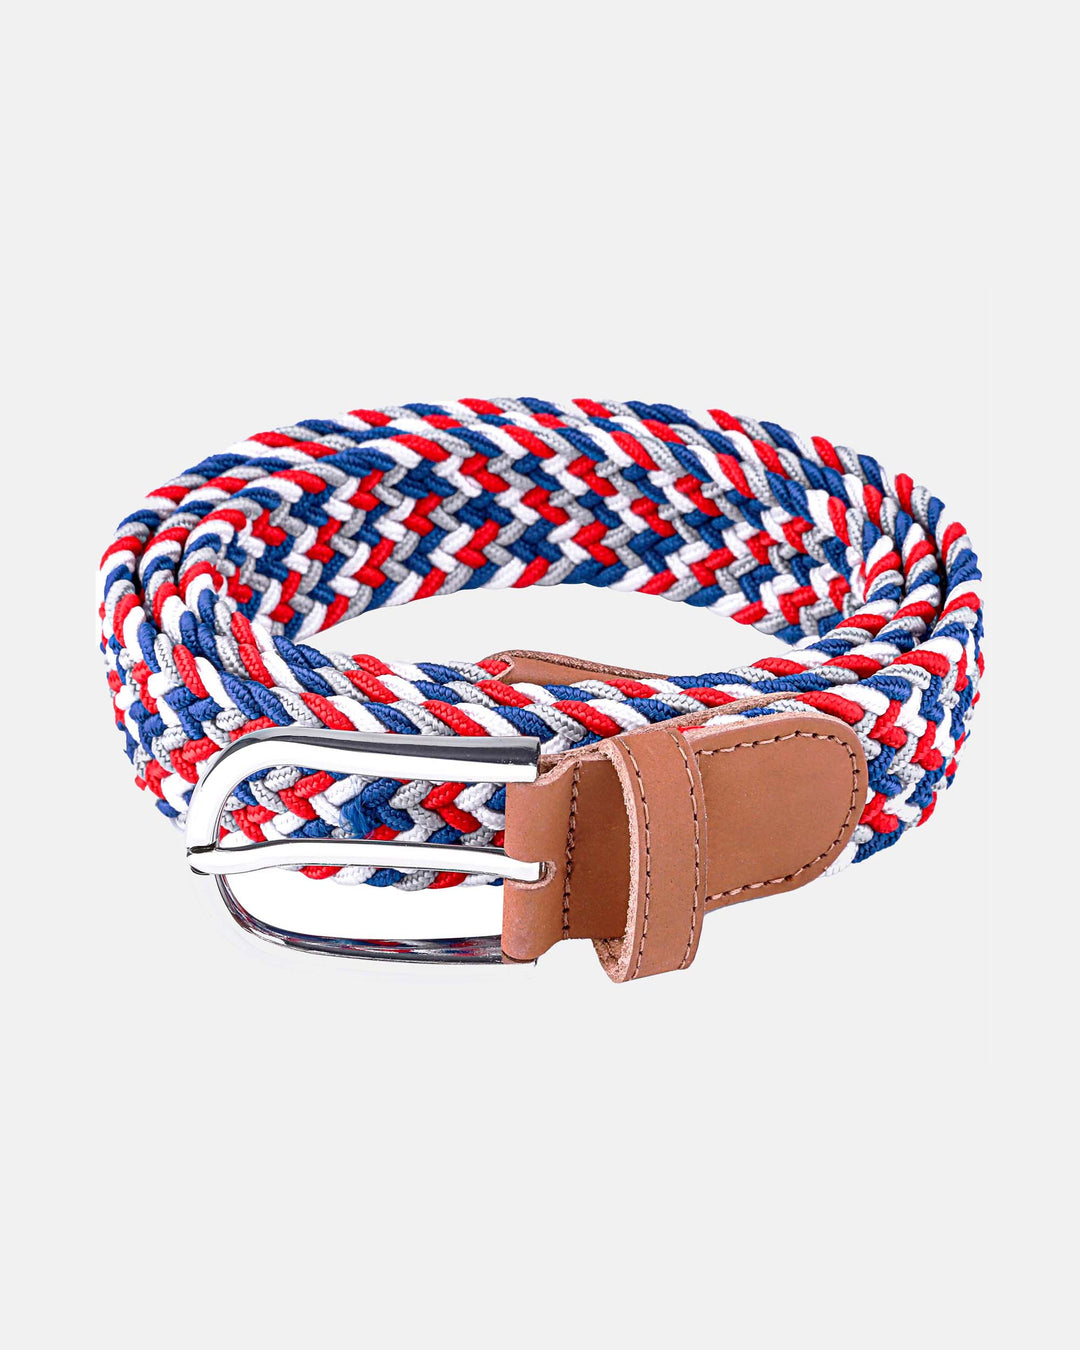 Ghost Golf Blue/Grey/White/Red Multi Color Belt with Rounded Steel Buckle and Tan Leather Tail 